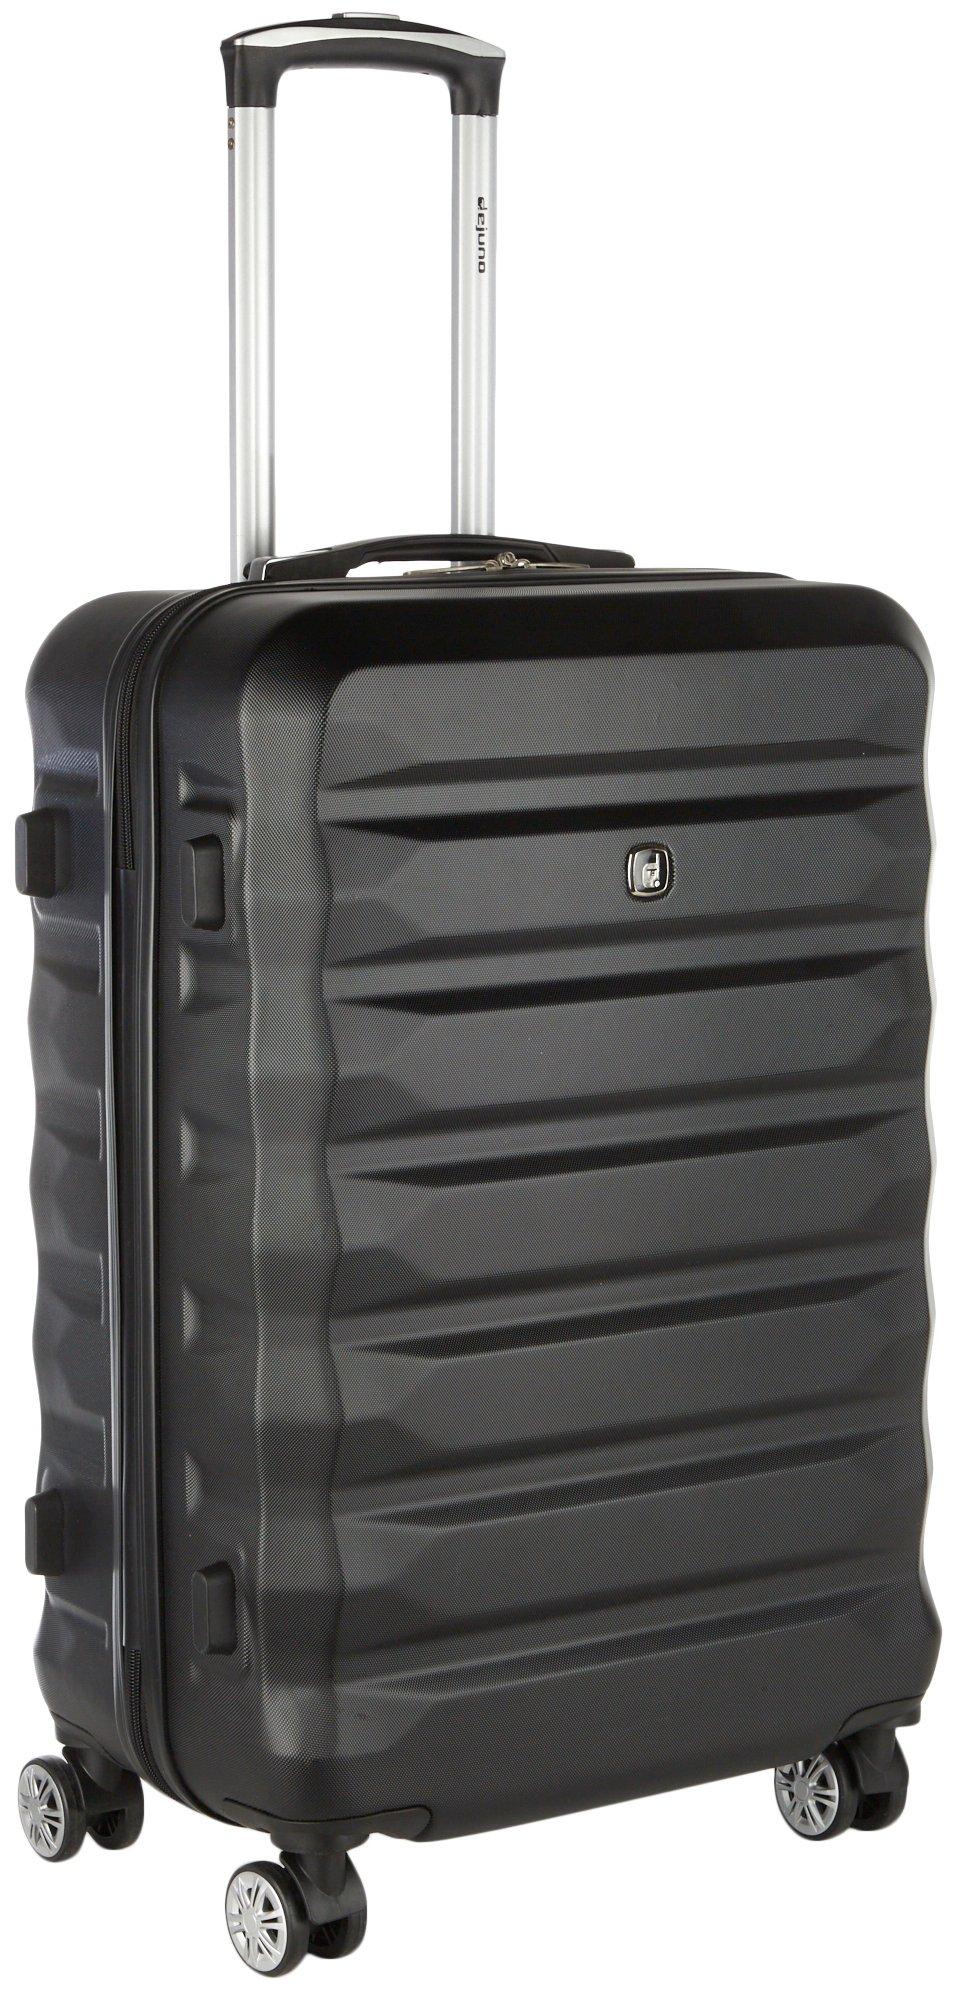 28'' Frontier Hardside Spinner Luggage